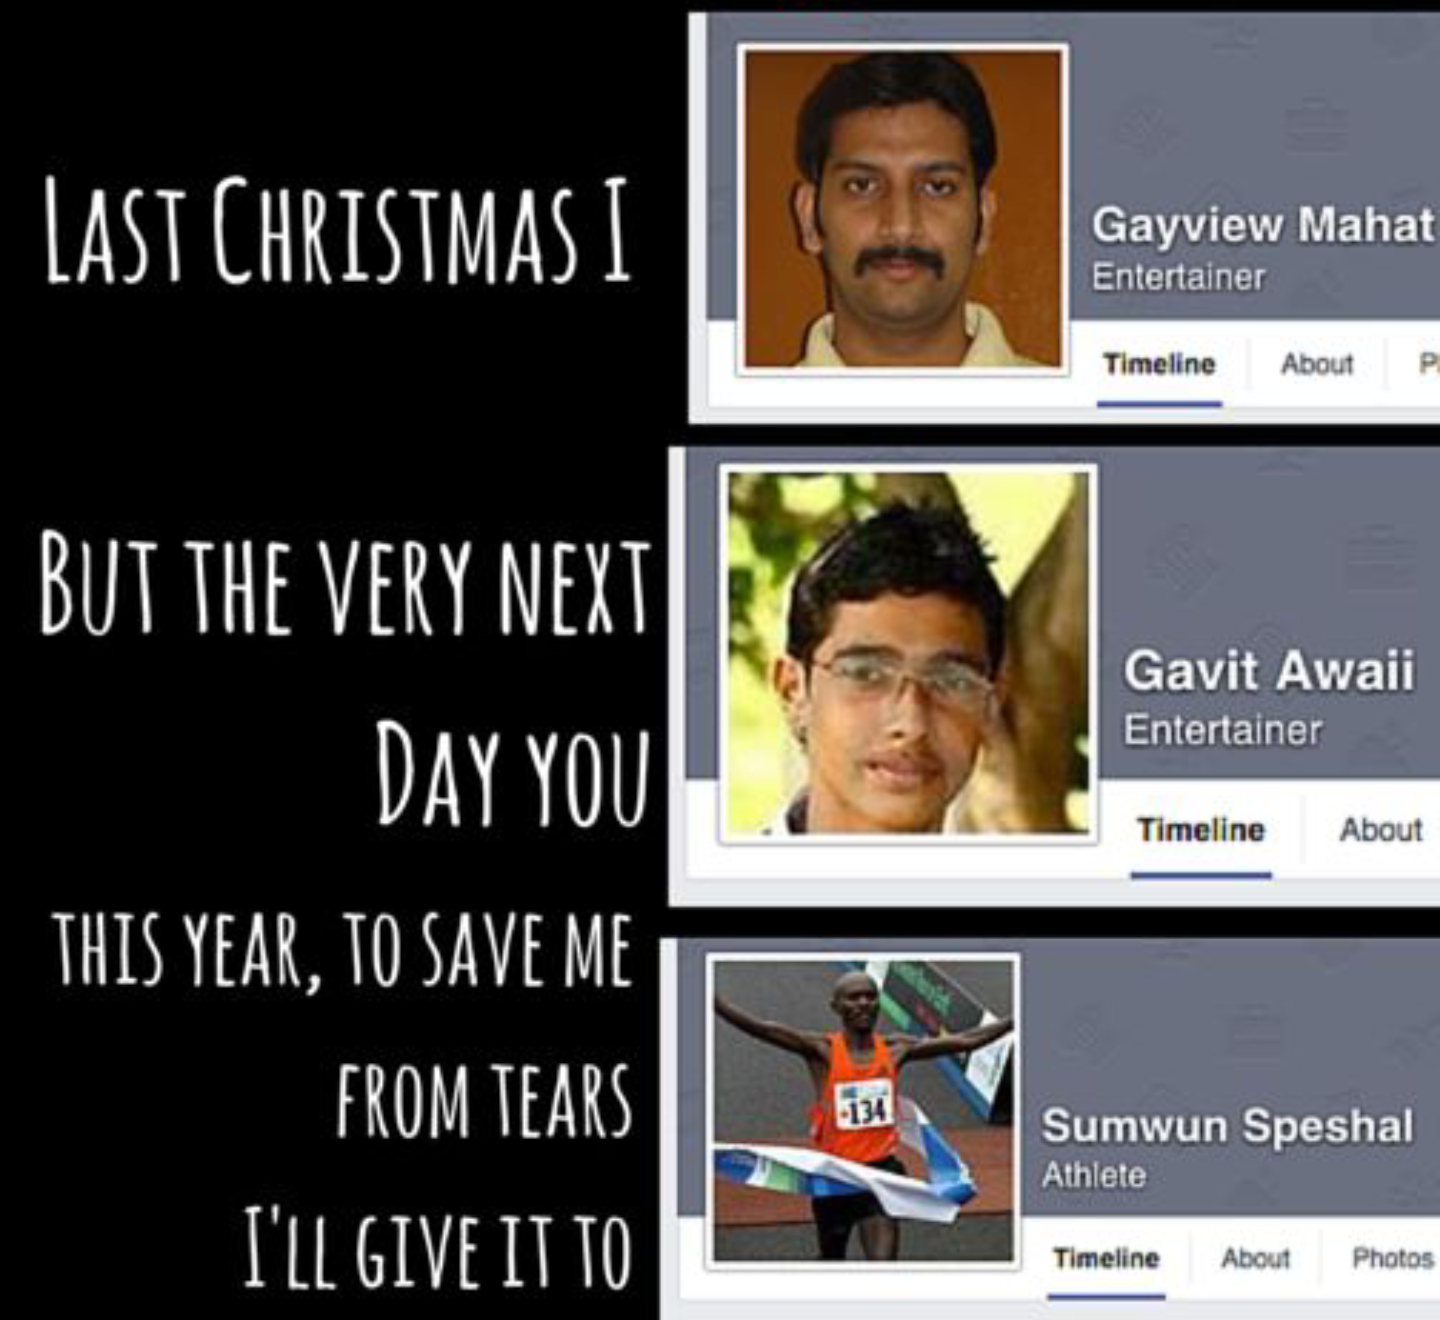 last christmas gayview mahaat - Last Christmas I Gayview Mahat Entertainer Timeline About But The Very Next Day You Gavit Awaii Entertainer Timeline About This Year, To Save Me From Tears I'Ll Give It To 104 Sumwun Speshal Athlete Timeline About Photos